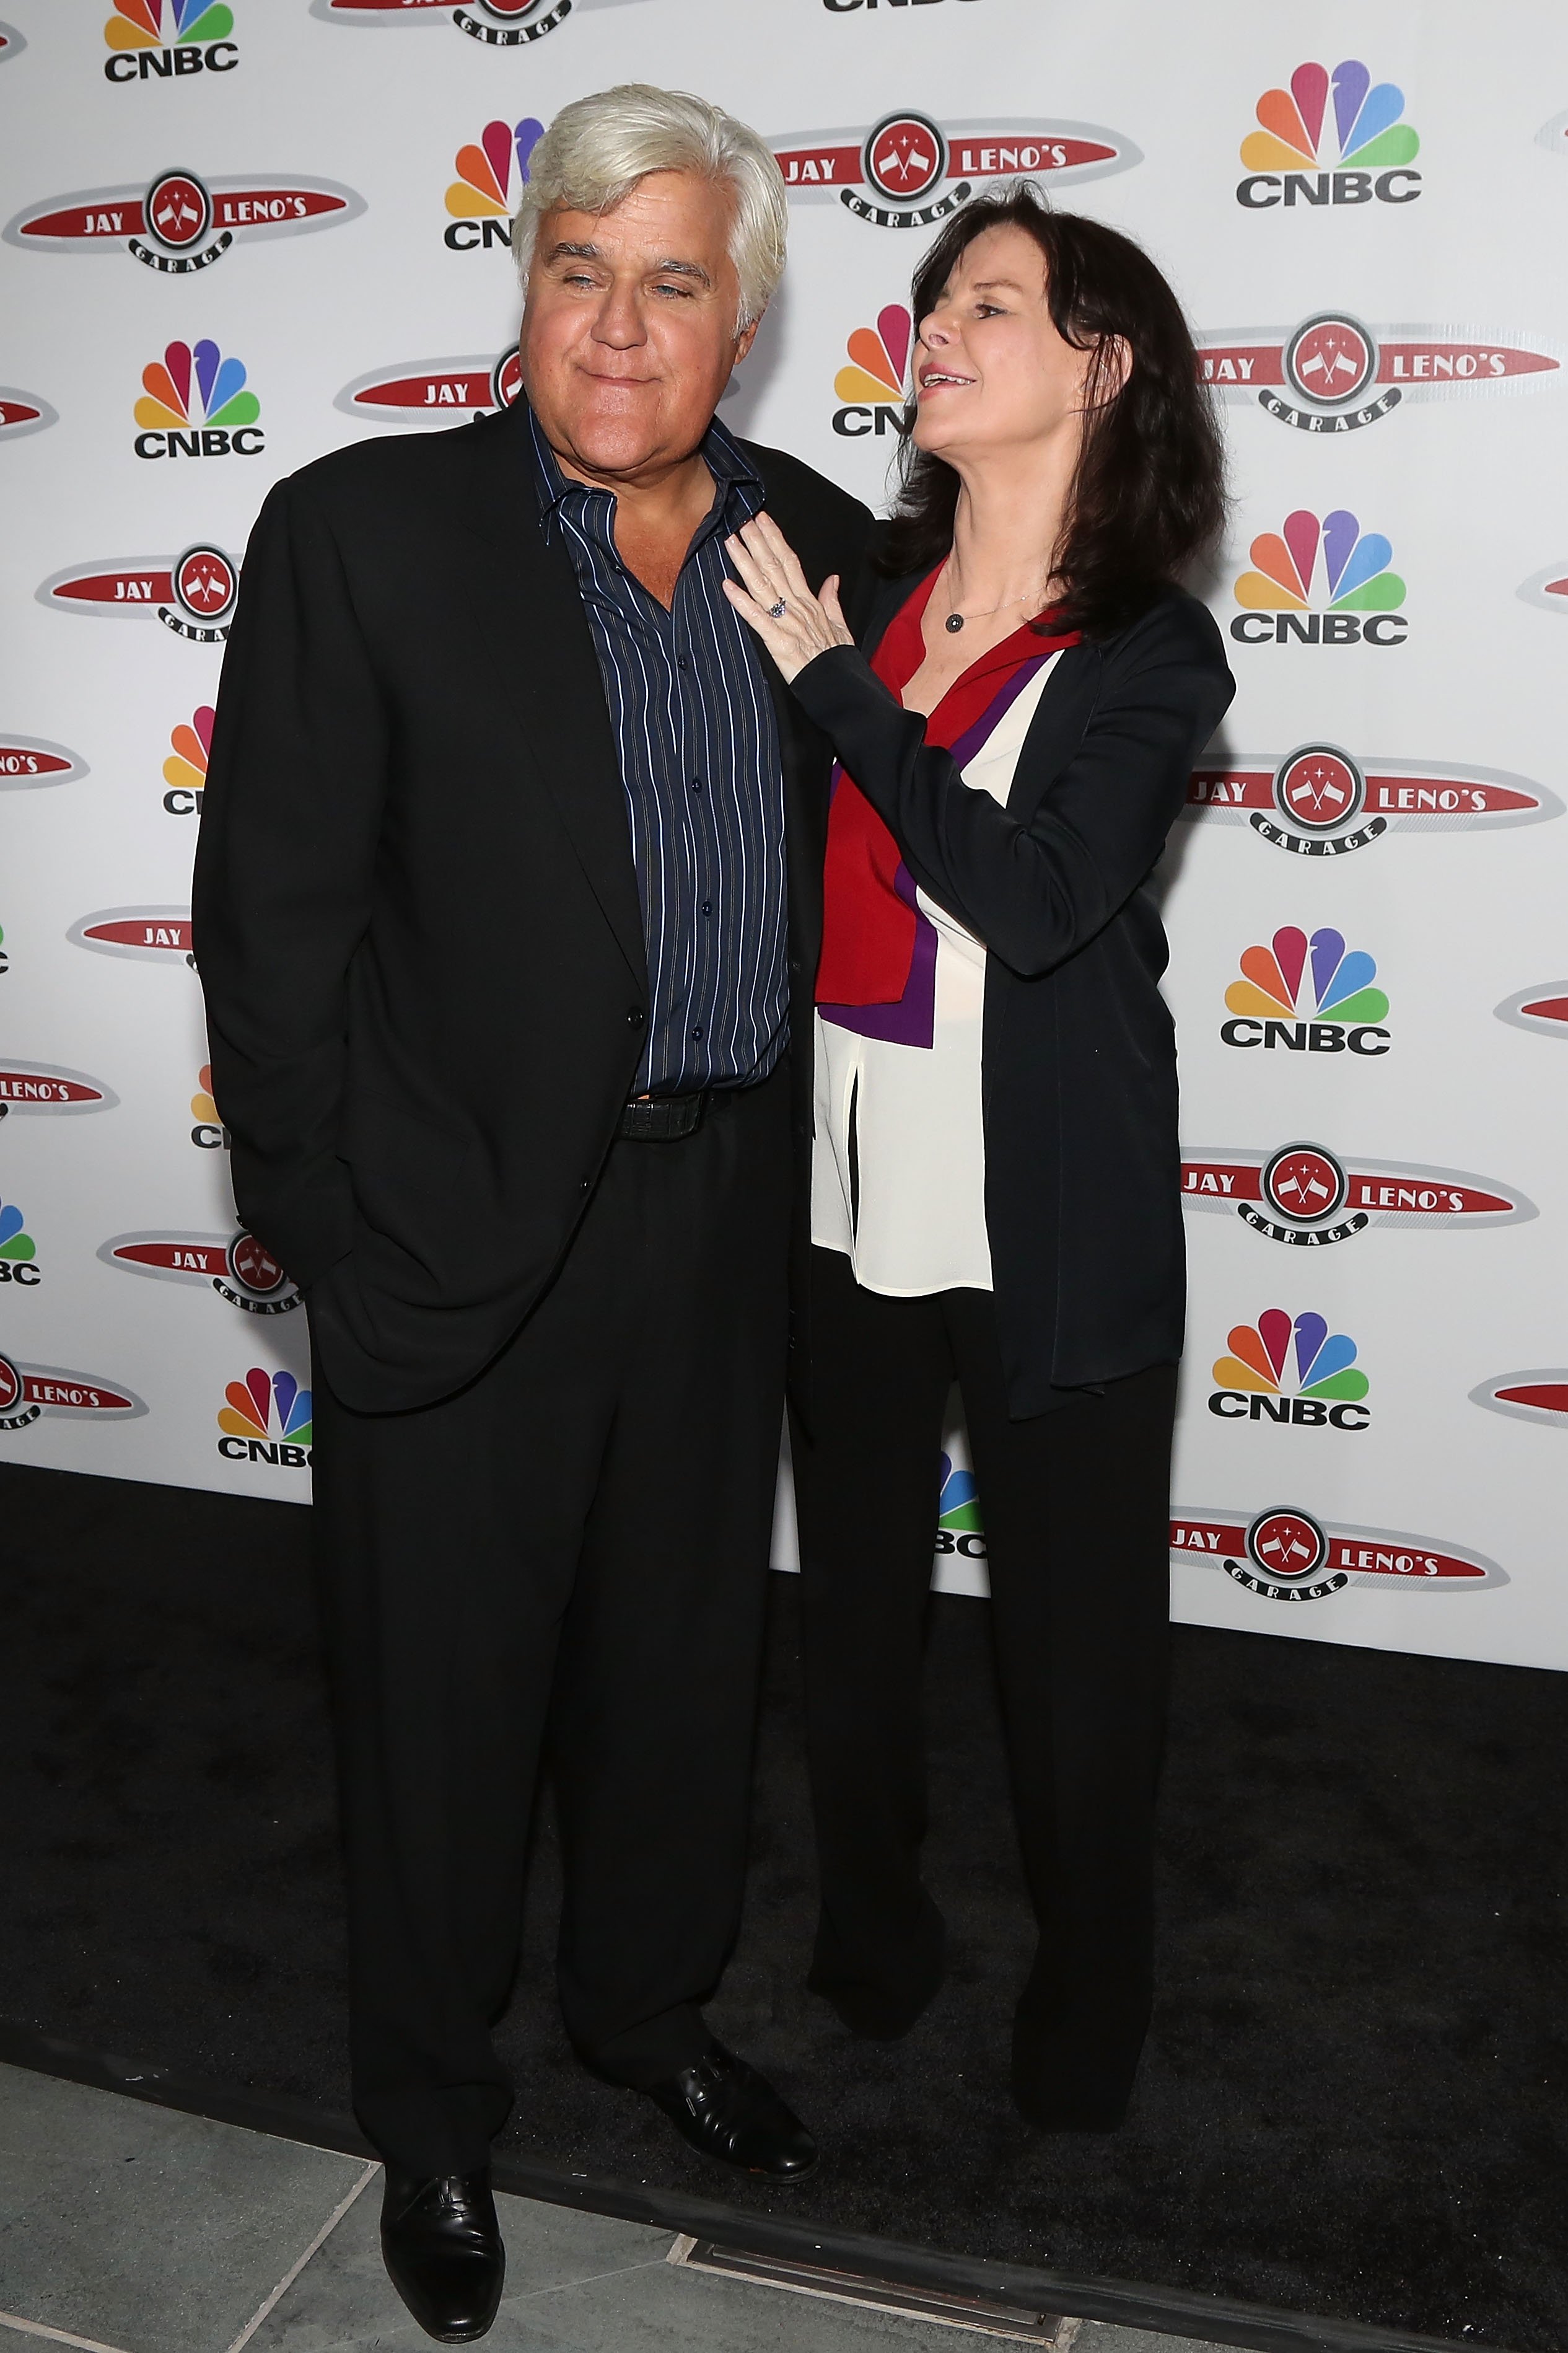 Jay and Mavis Leno at the premiere of "Jay Leno's Garage" on October 7, 2015, in New York City. | Source: Taylor Hill/FilmMagic/Getty Images